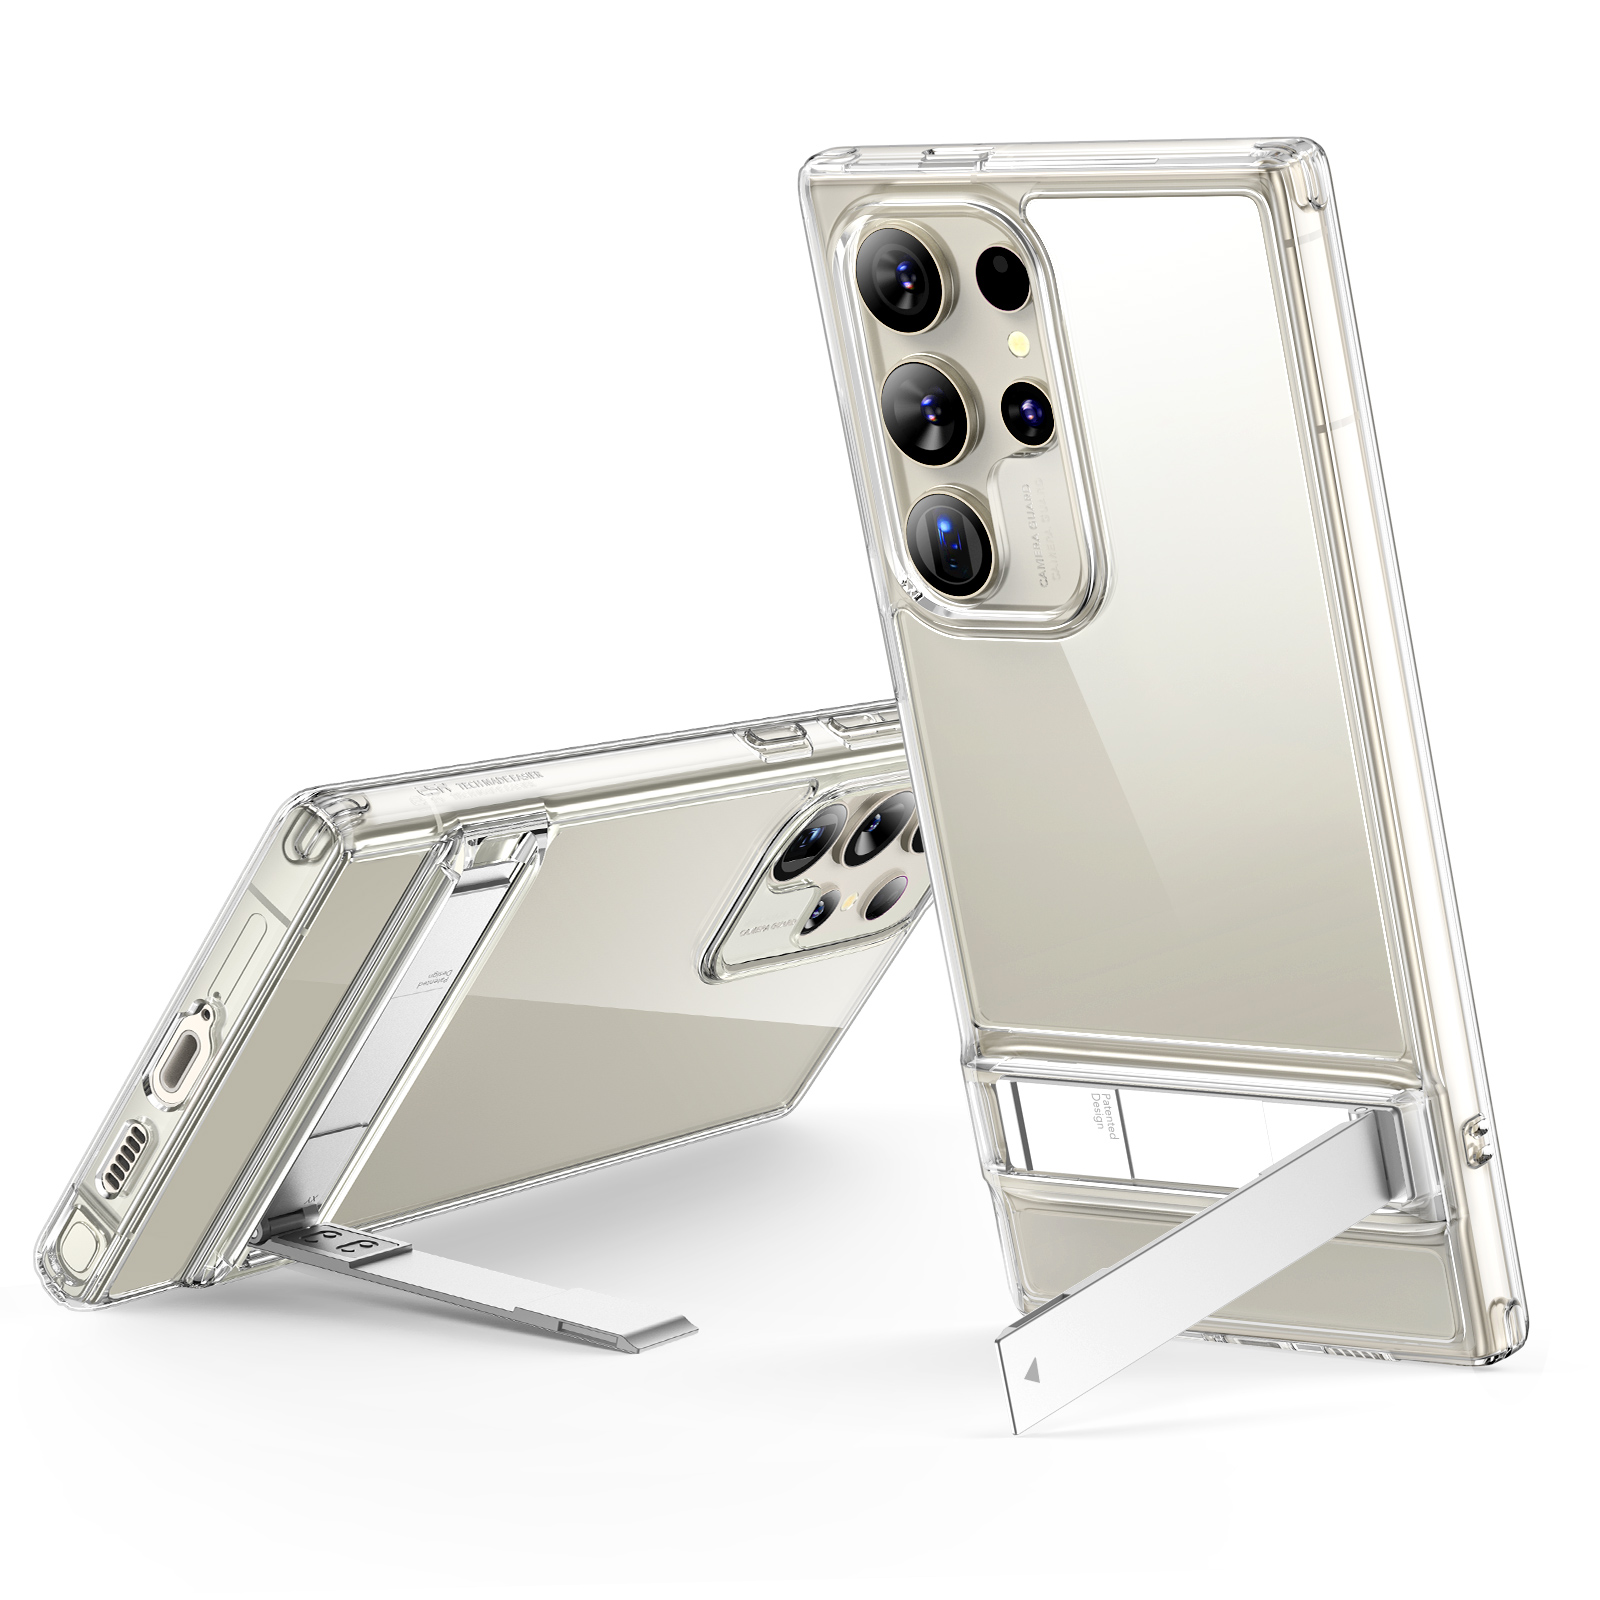 The perfect S24 Ultra case with stand for hands-free, on-demand